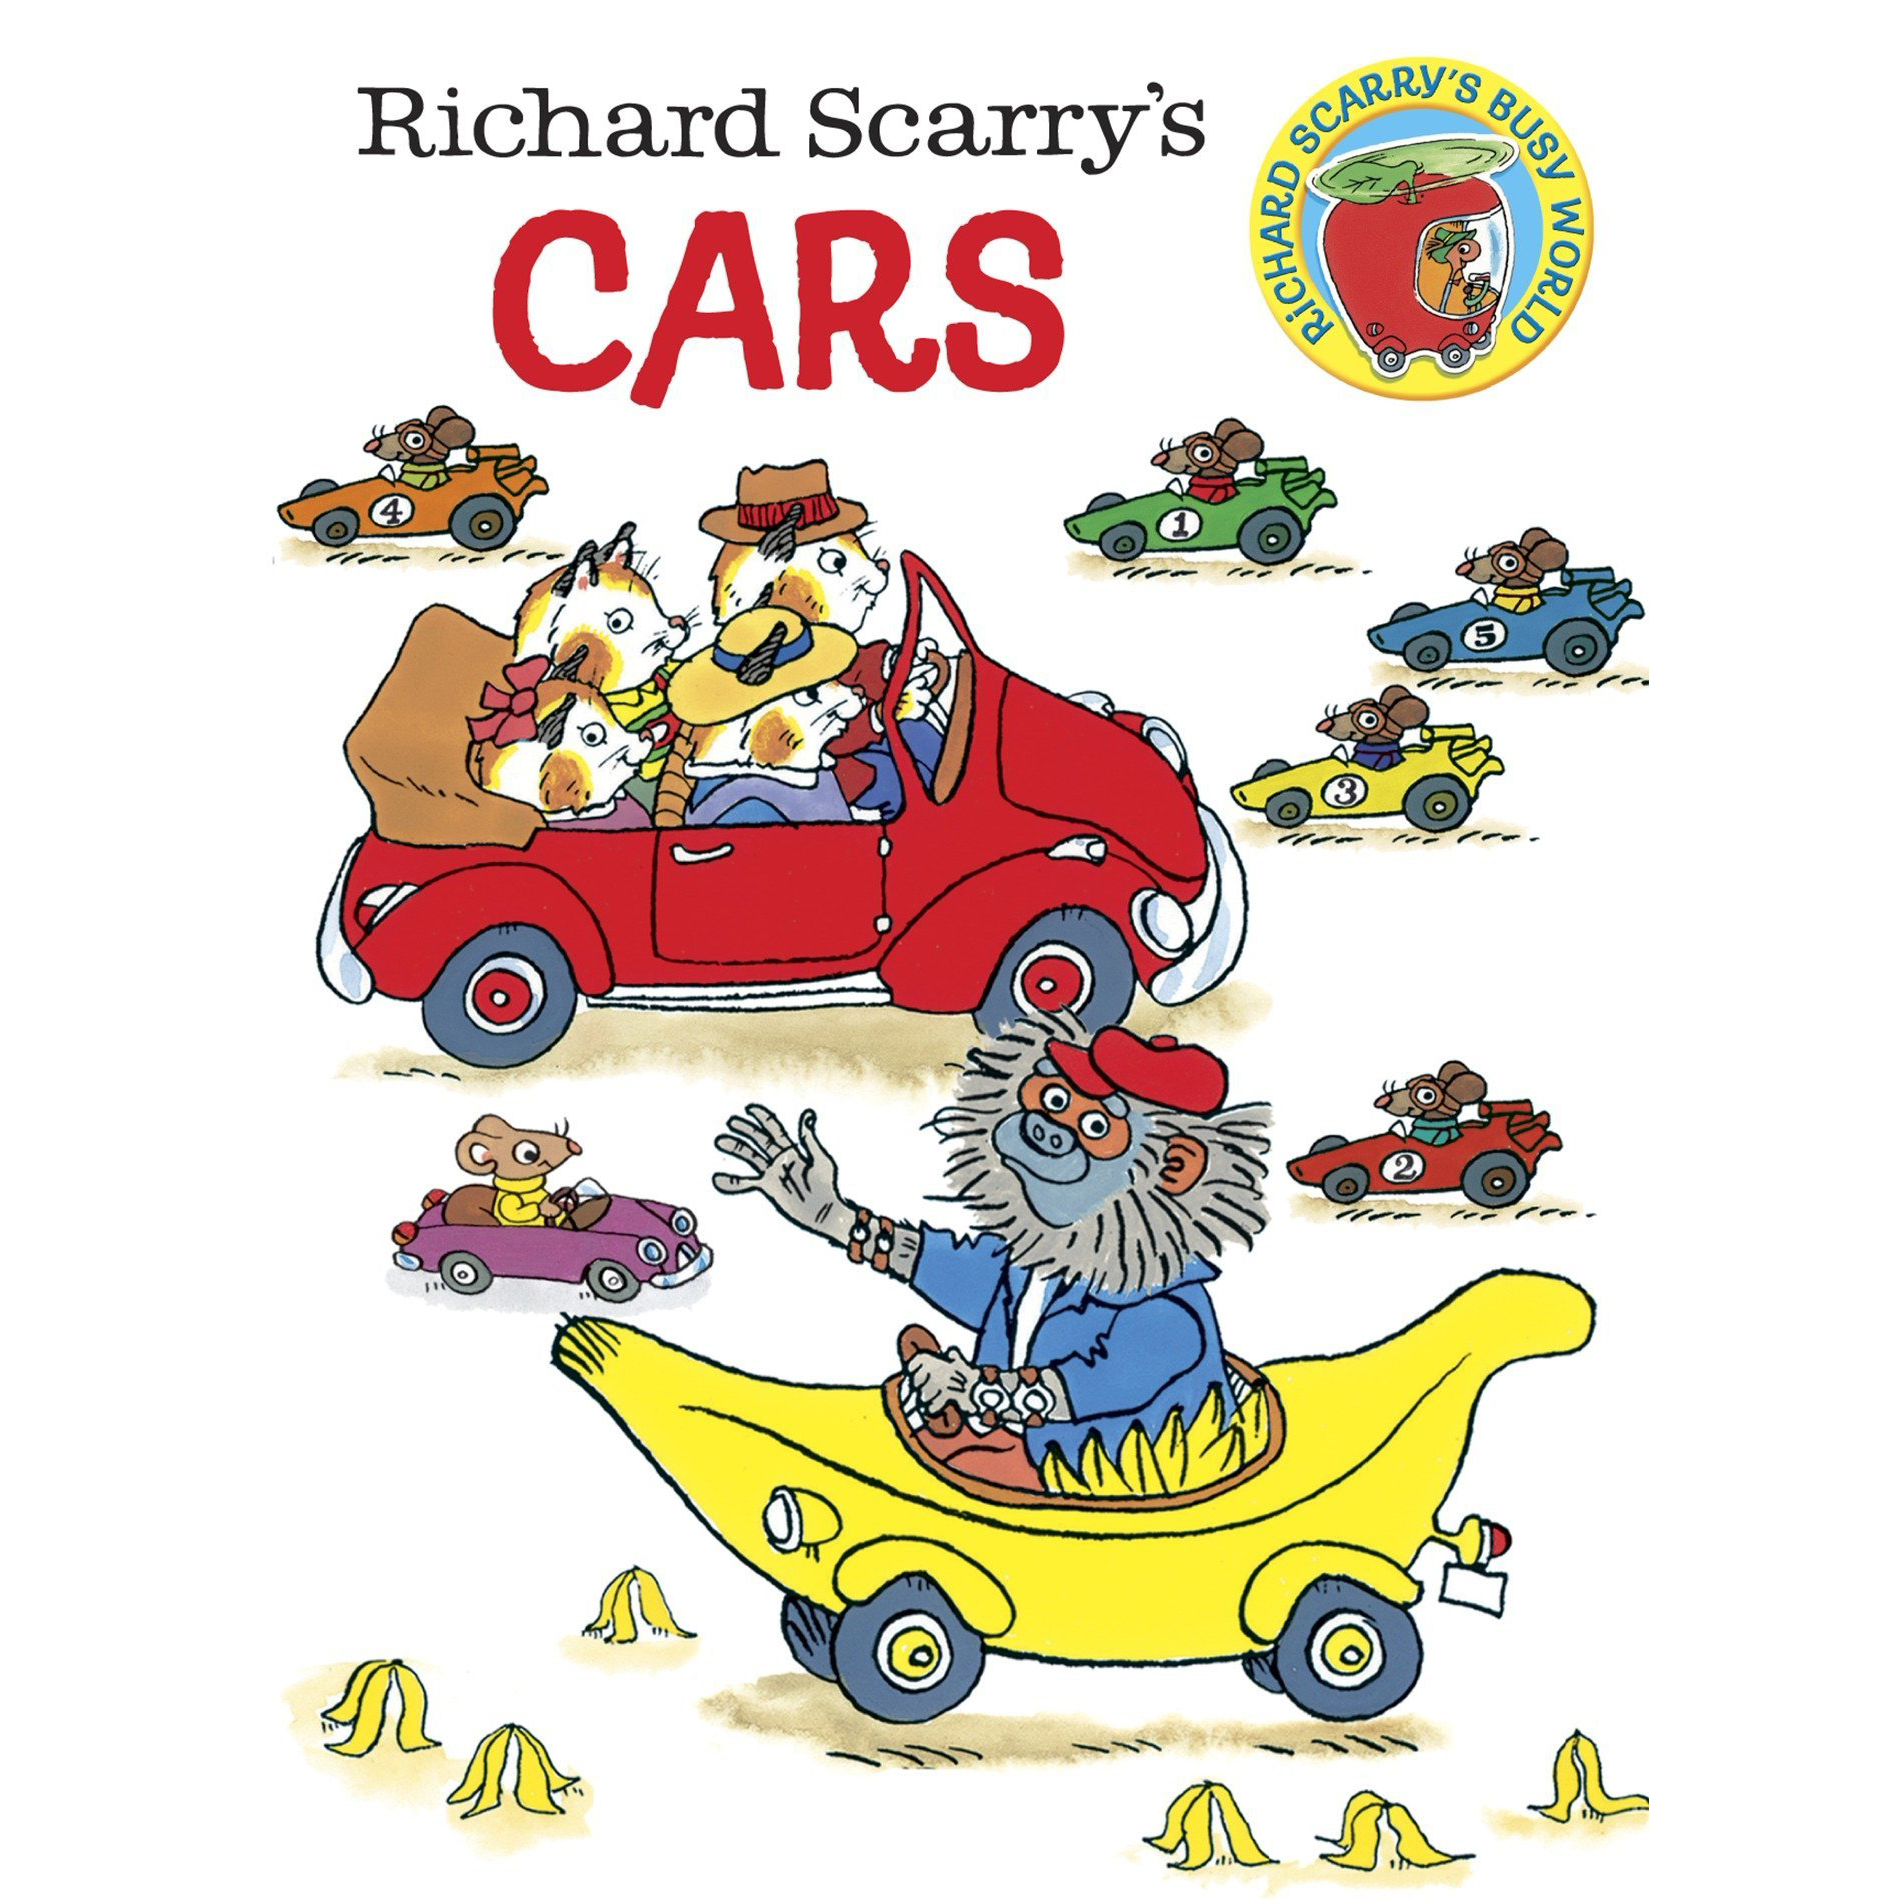 Richard Scarry's Cars board book 1